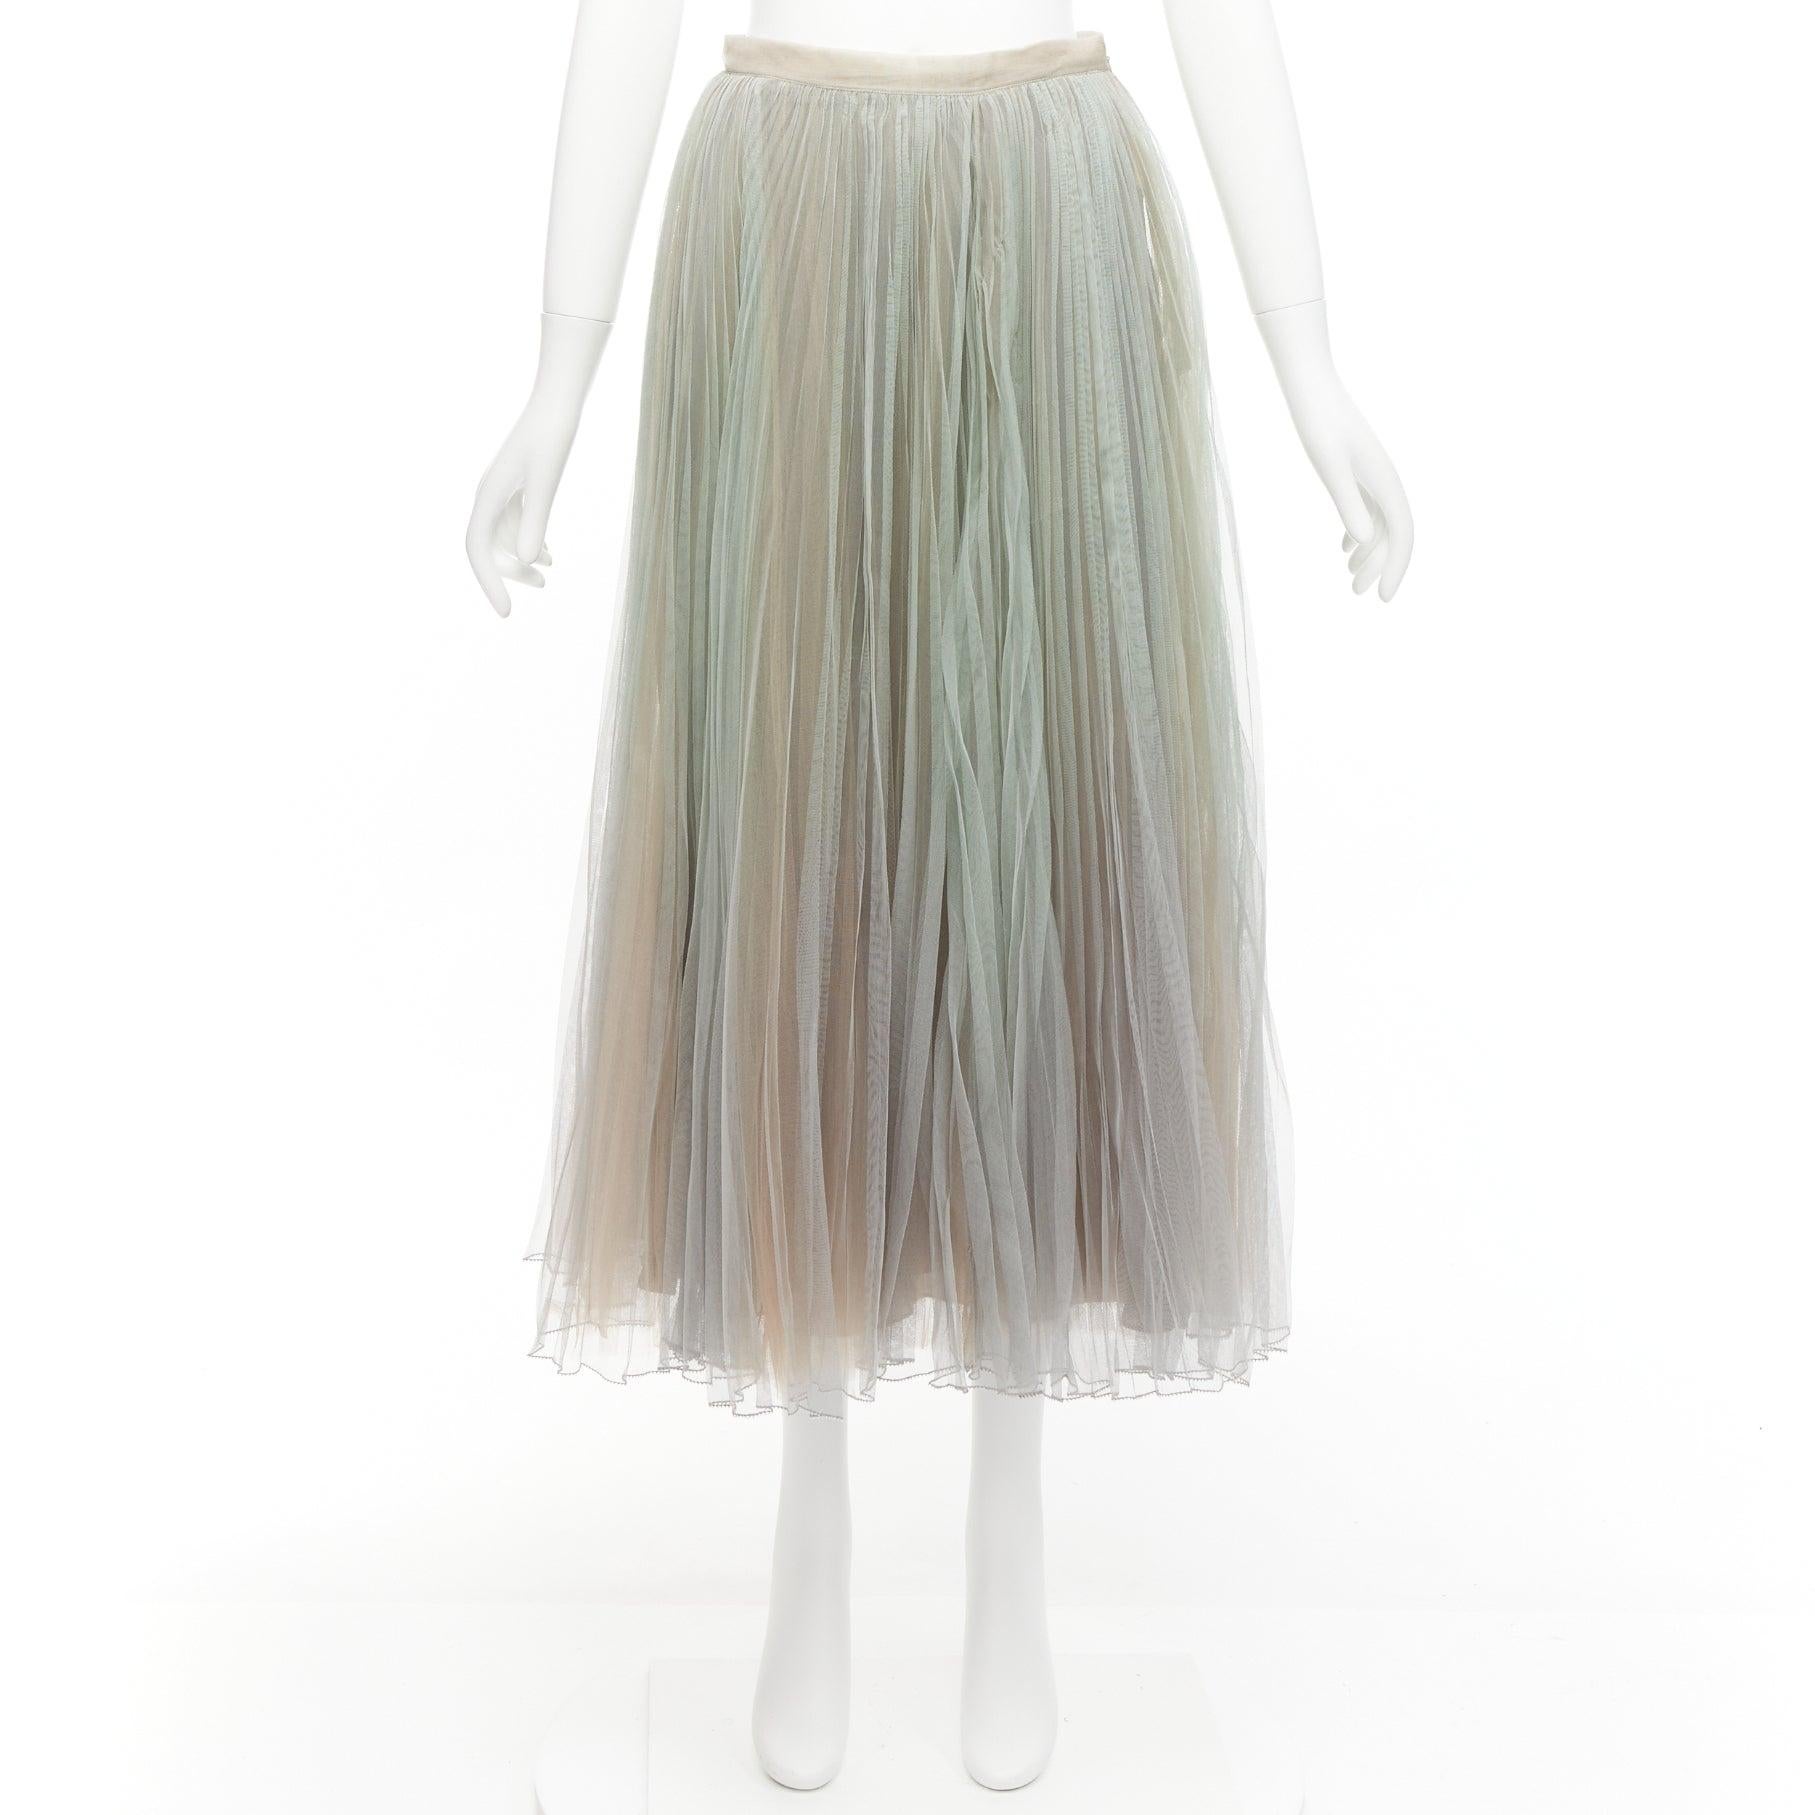 CHRISTIAN DIOR green nude pleated sheer tulle layered midi skirt FR36 S 5